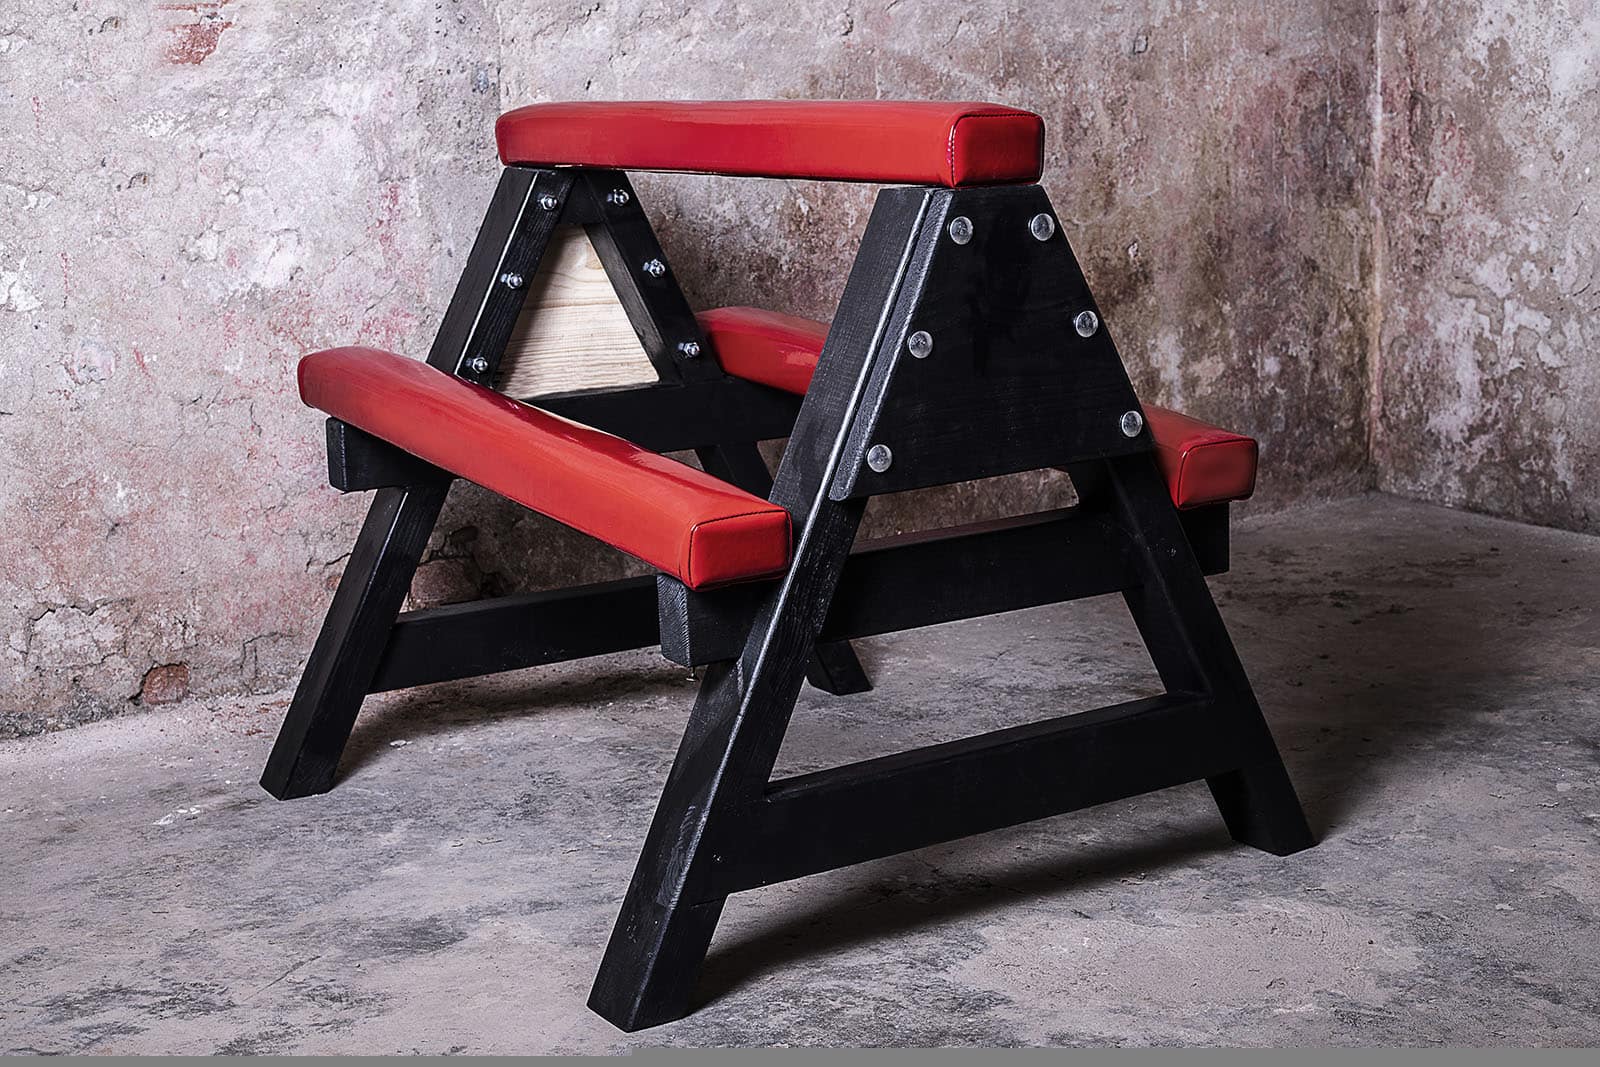 Buy The Bdsm Architecture Wooden Spanking Bench At Cloud Climax